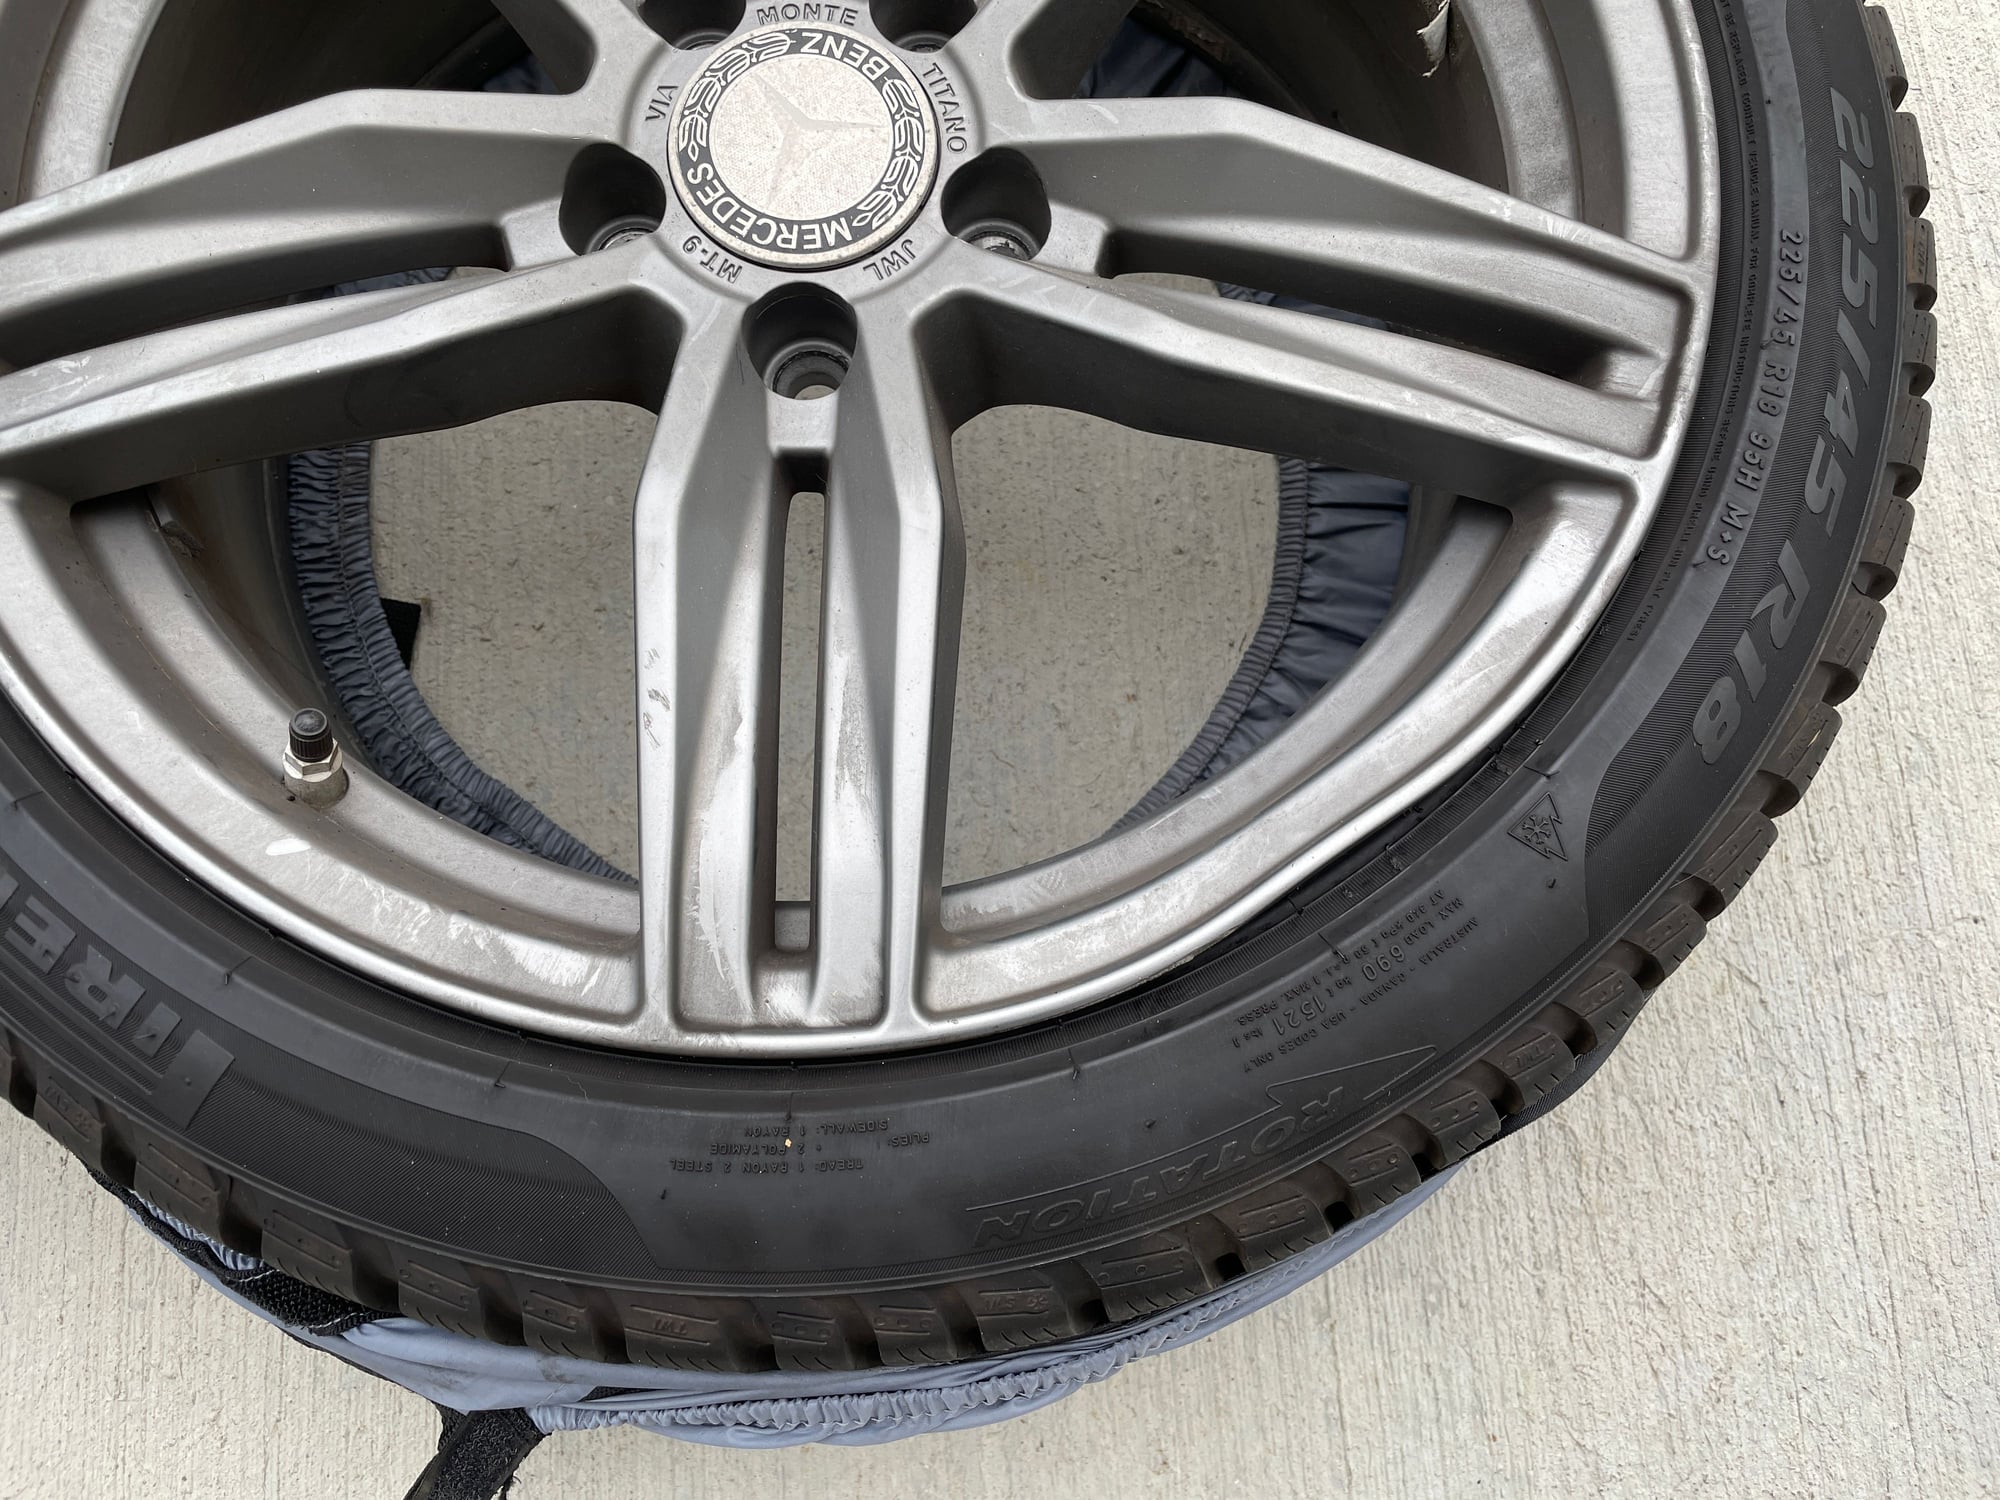 Wheels and Tires/Axles - 18" Aftermarket Rims, Pirelli Sottozero 3 Snow Tires, Covers, Centercaps and TPMS - Used - 2015 to 2021 Mercedes-Benz C-Class - Beacon, NY 12508, United States